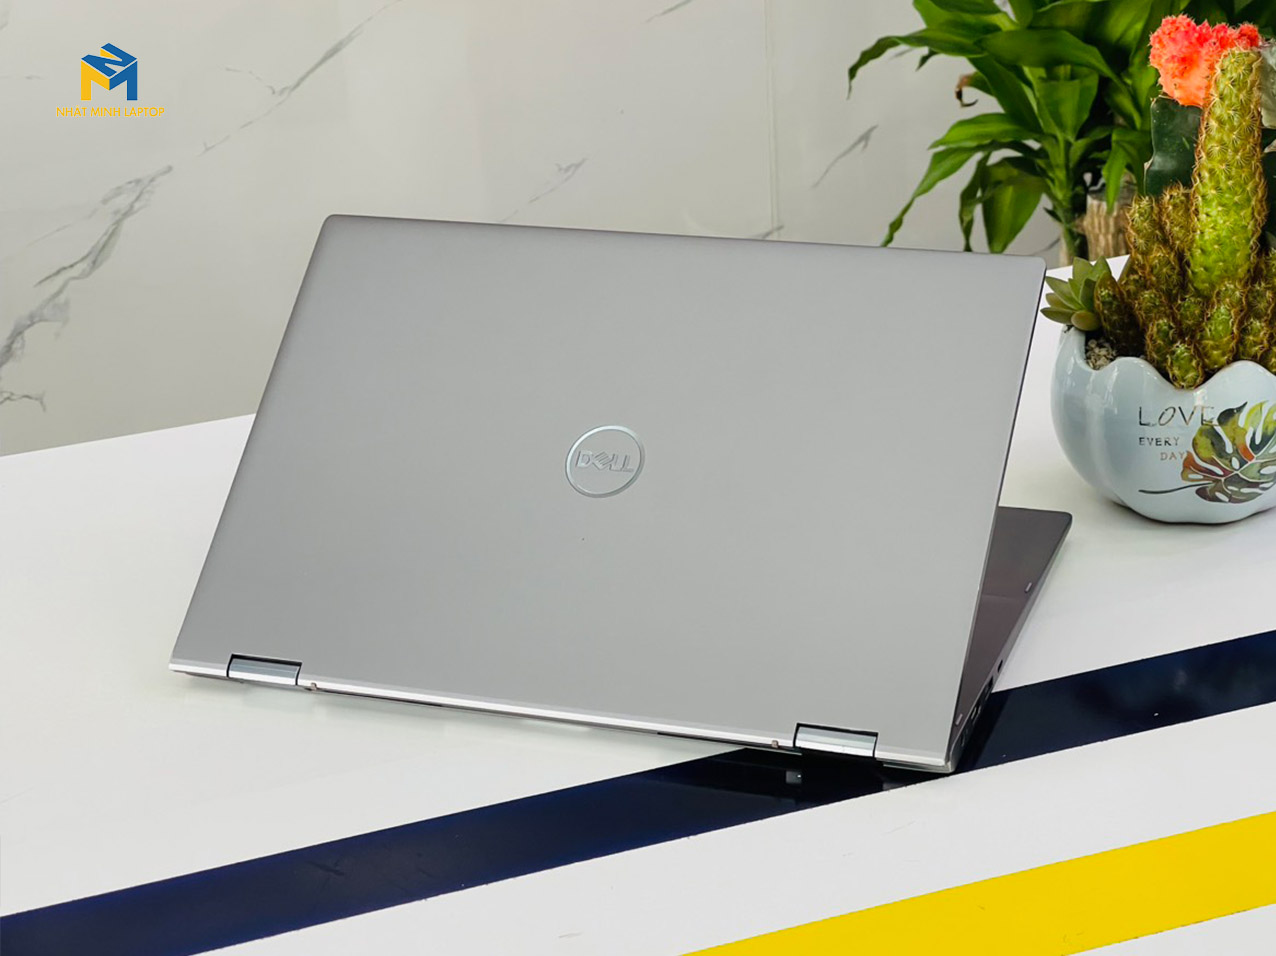 dell inspiron 5400 2-in-1 i7 giá rẻ